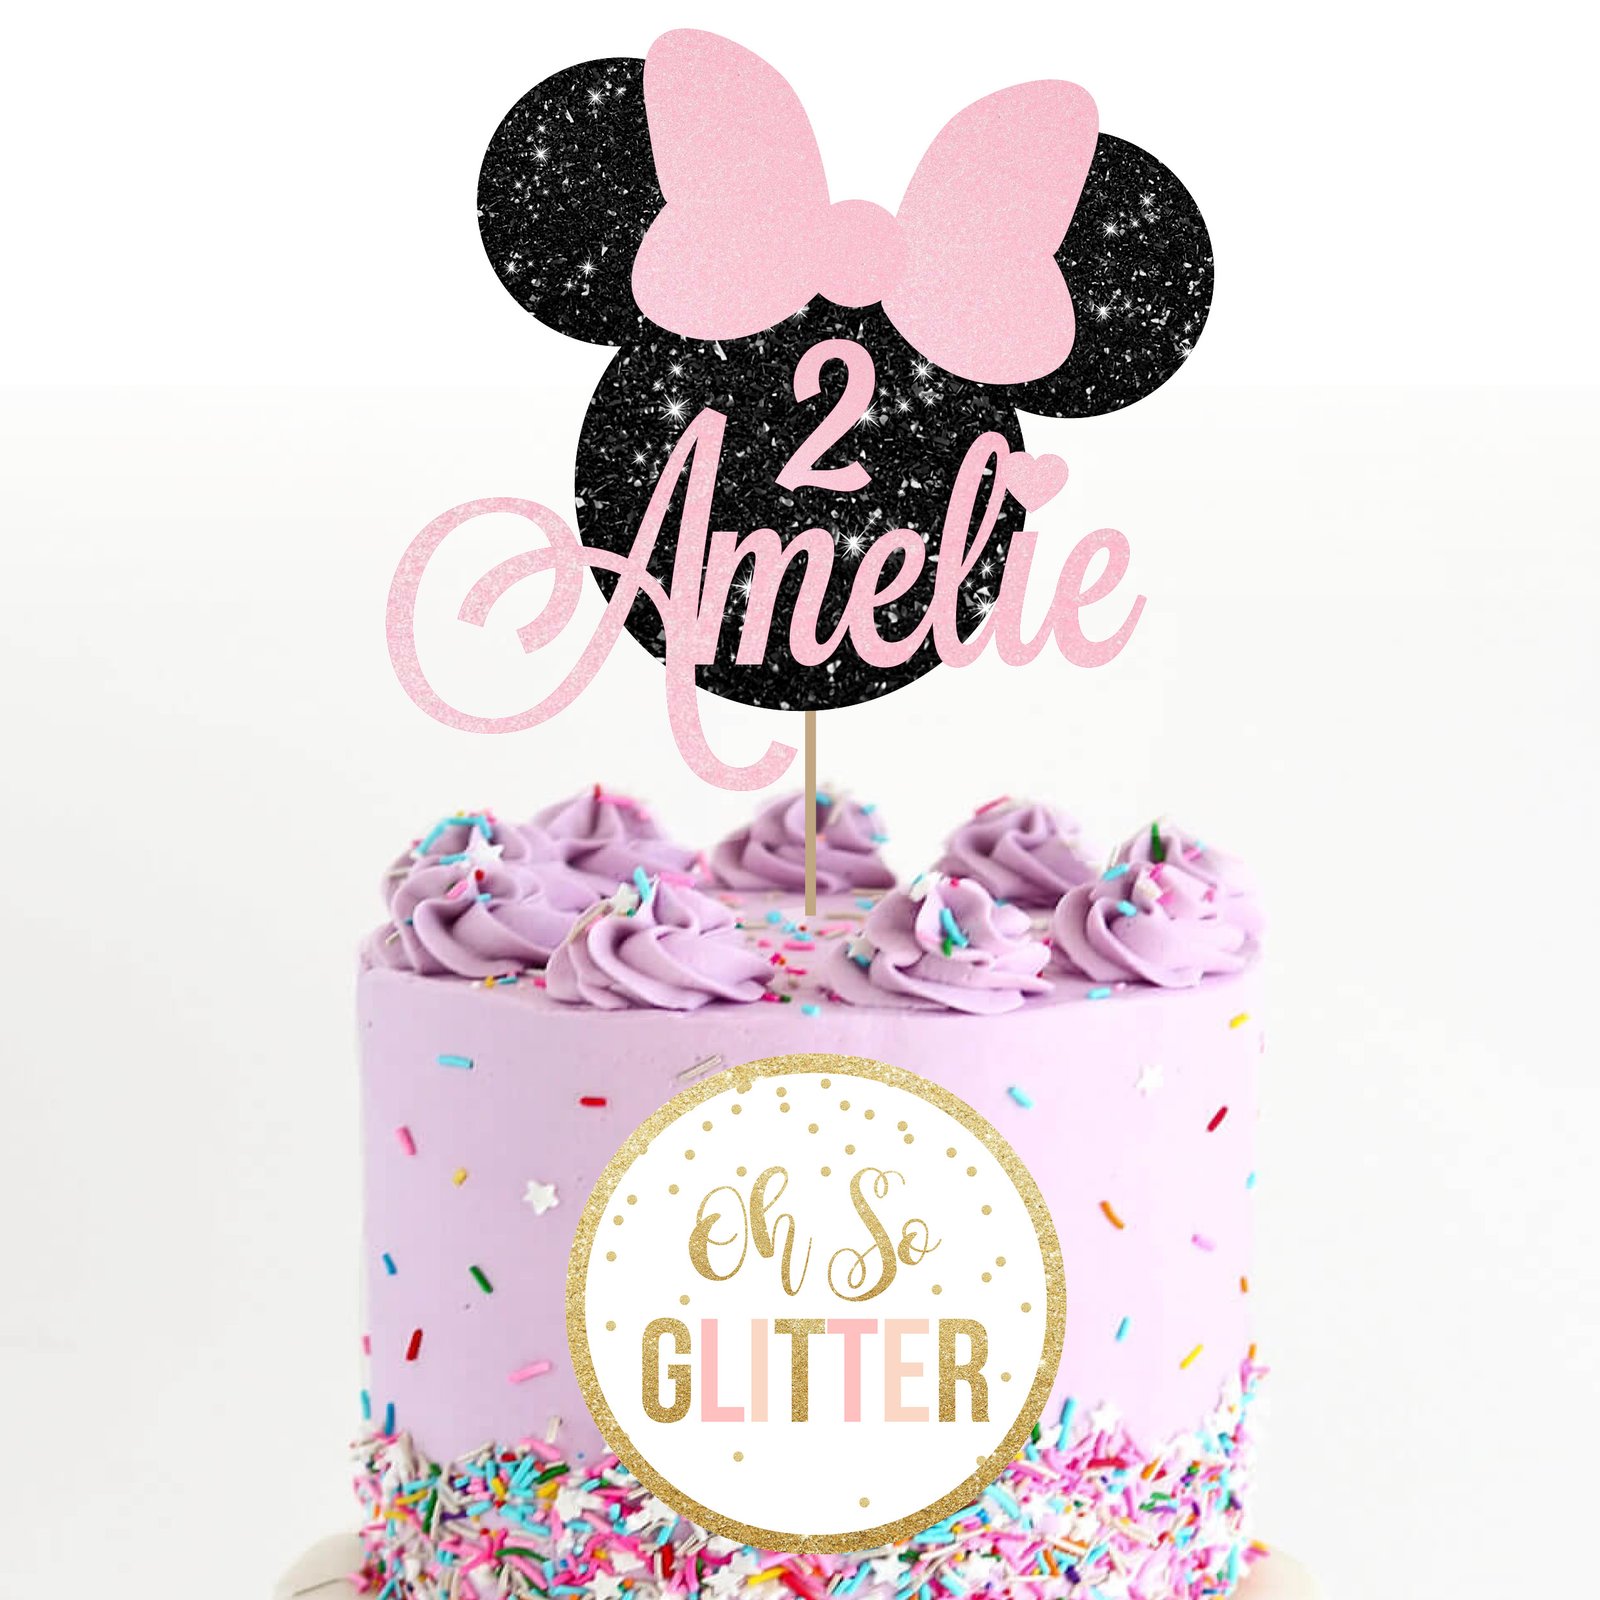 Minnie Mouse Classic Cake Topper | Minnie Mouse Cake Topper | Minnie Mouse  Cake Strips | Minnie Mouse Classic Cake Wraps | Minnie Mouse Classic Cake | Minnie  Mouse Cake Topper |